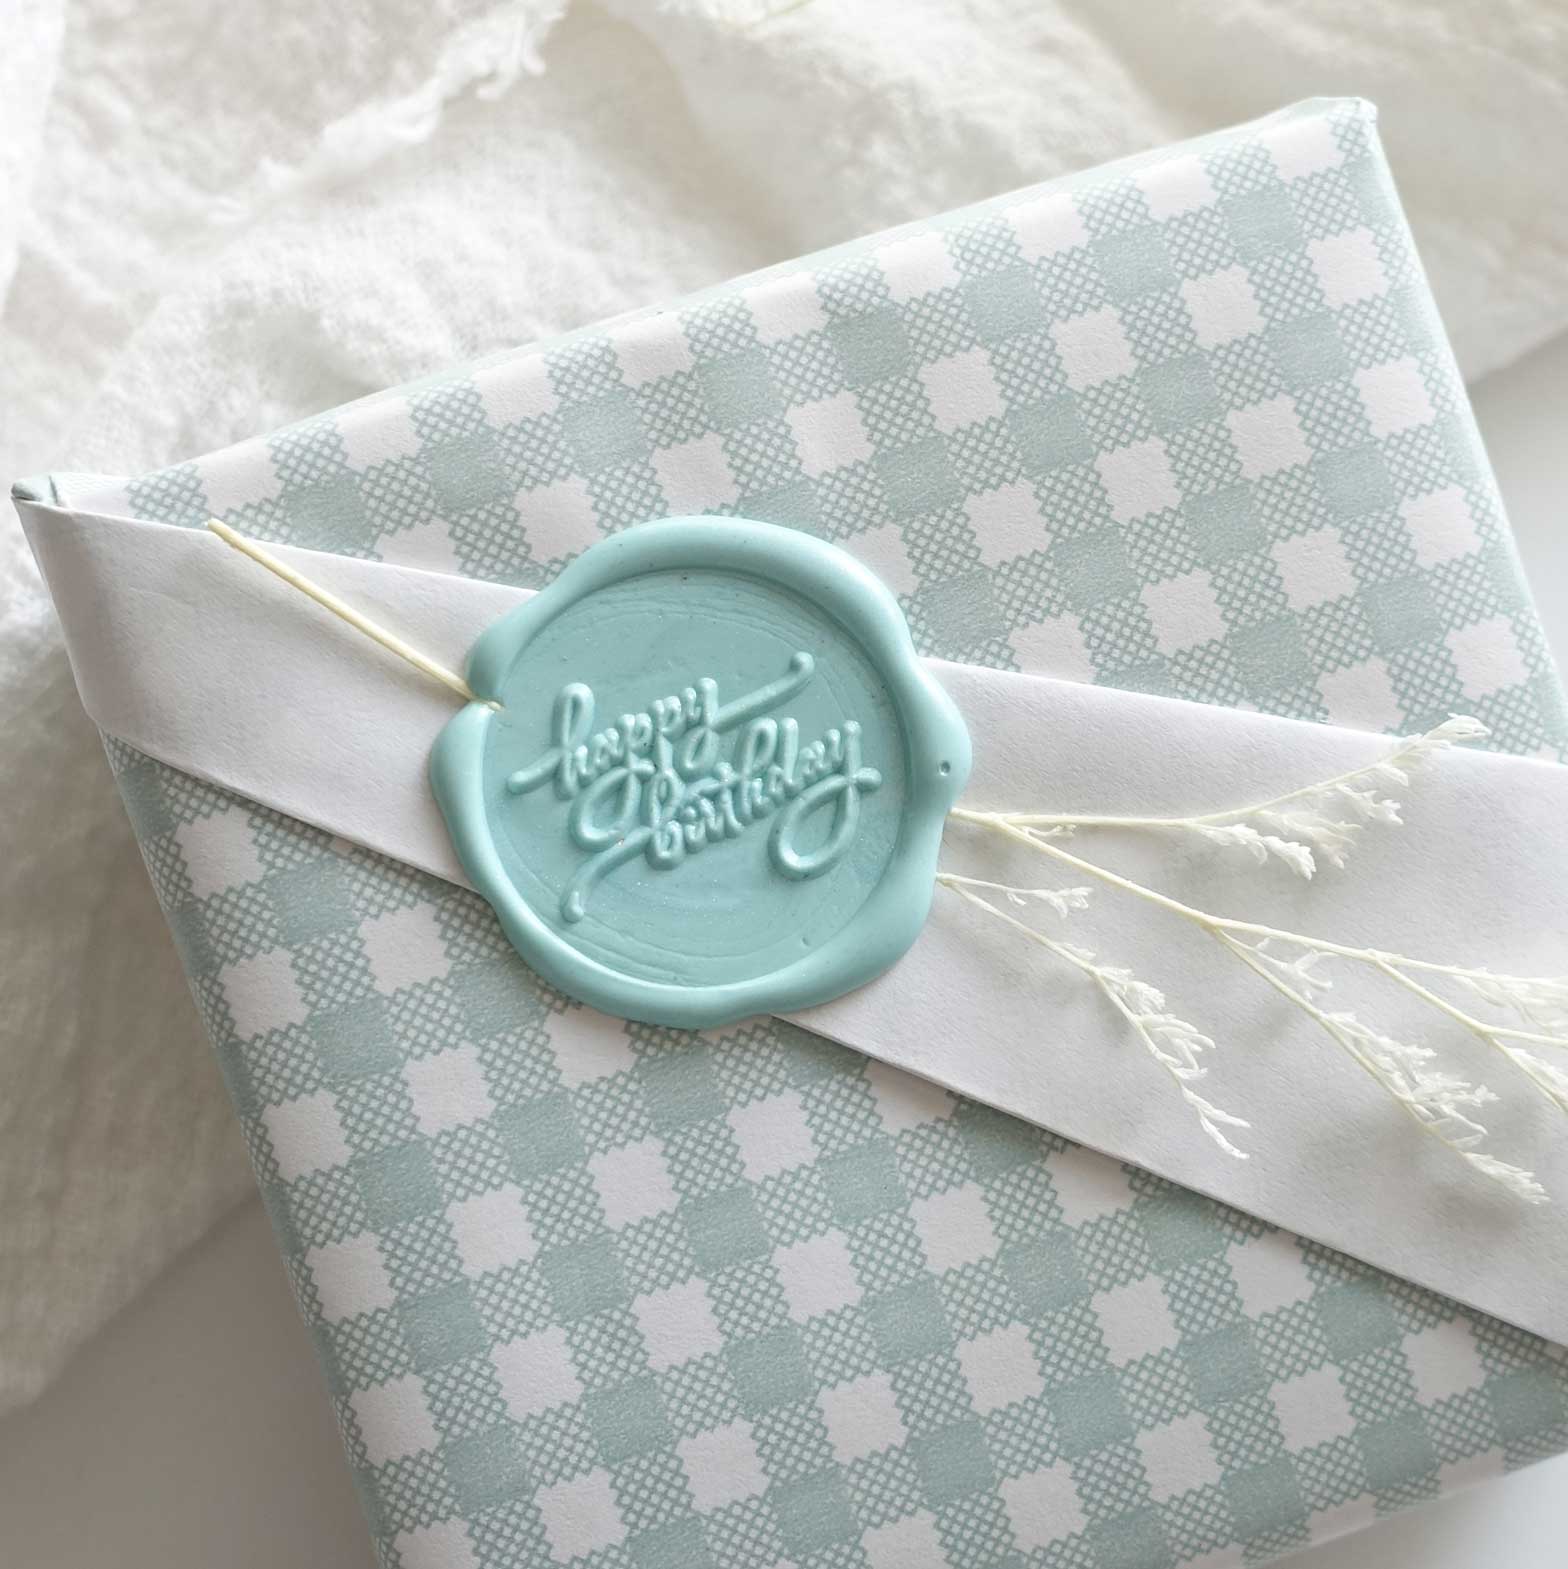 Happy birthday wax seal with gingham wrapping paper